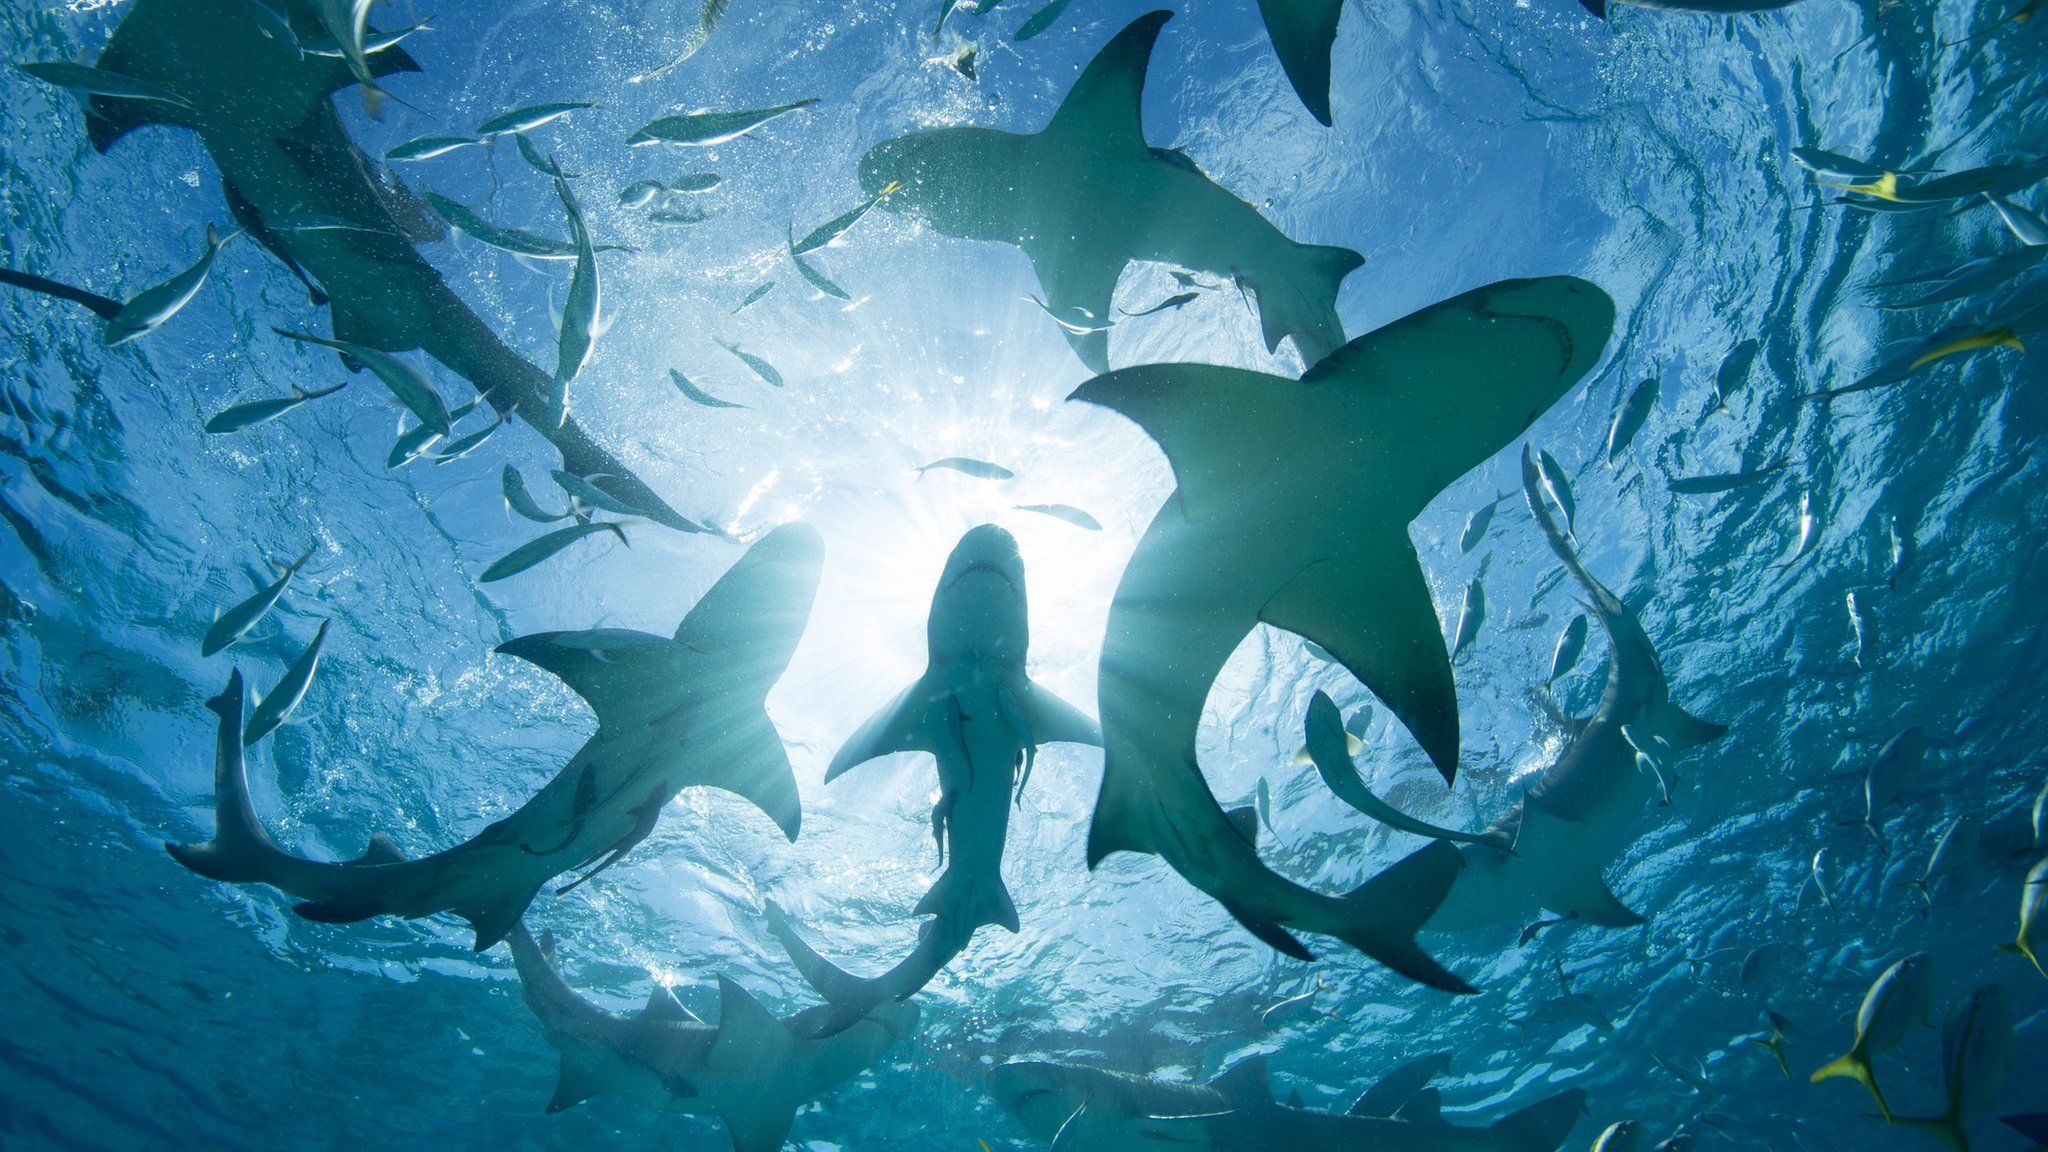 A school of sharks in the ocean viewed from below with sunlight shining directly upon them